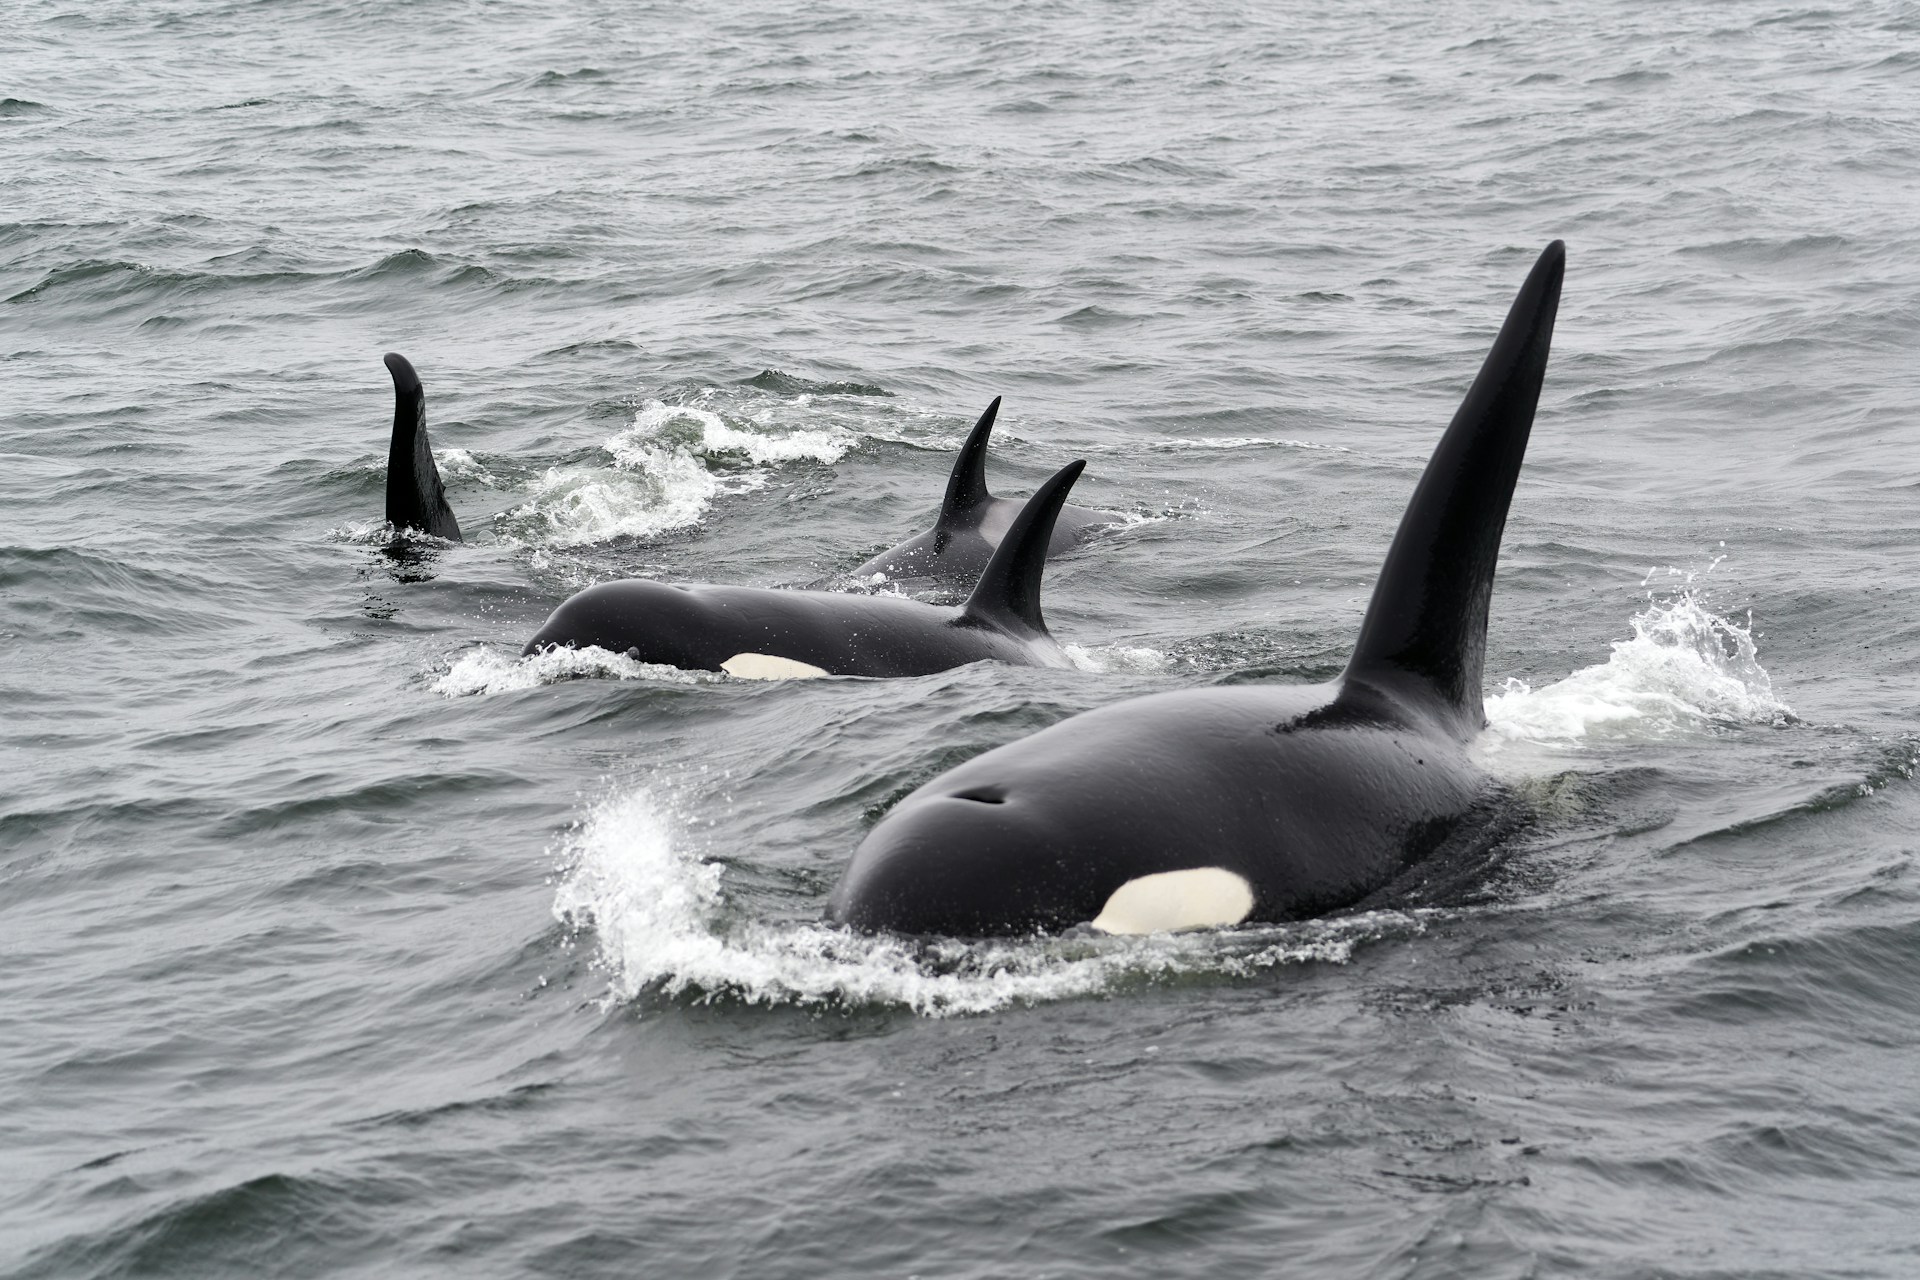 Orcas Attack Sailing Boat, Oil Tanker to the Rescue